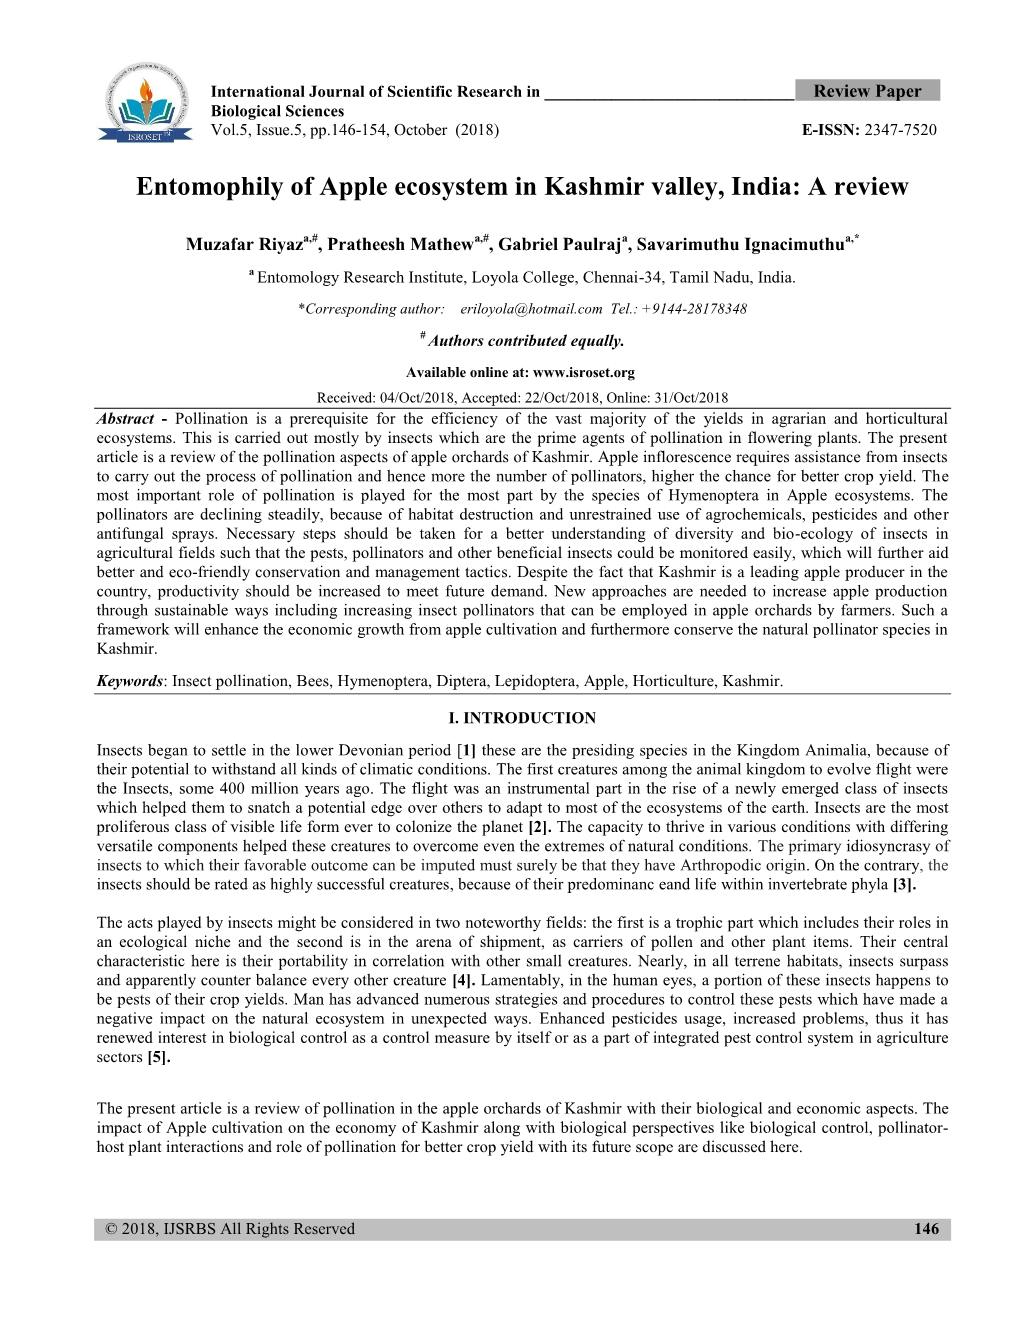 Entomophily of Apple Ecosystem in Kashmir Valley, India: a Review